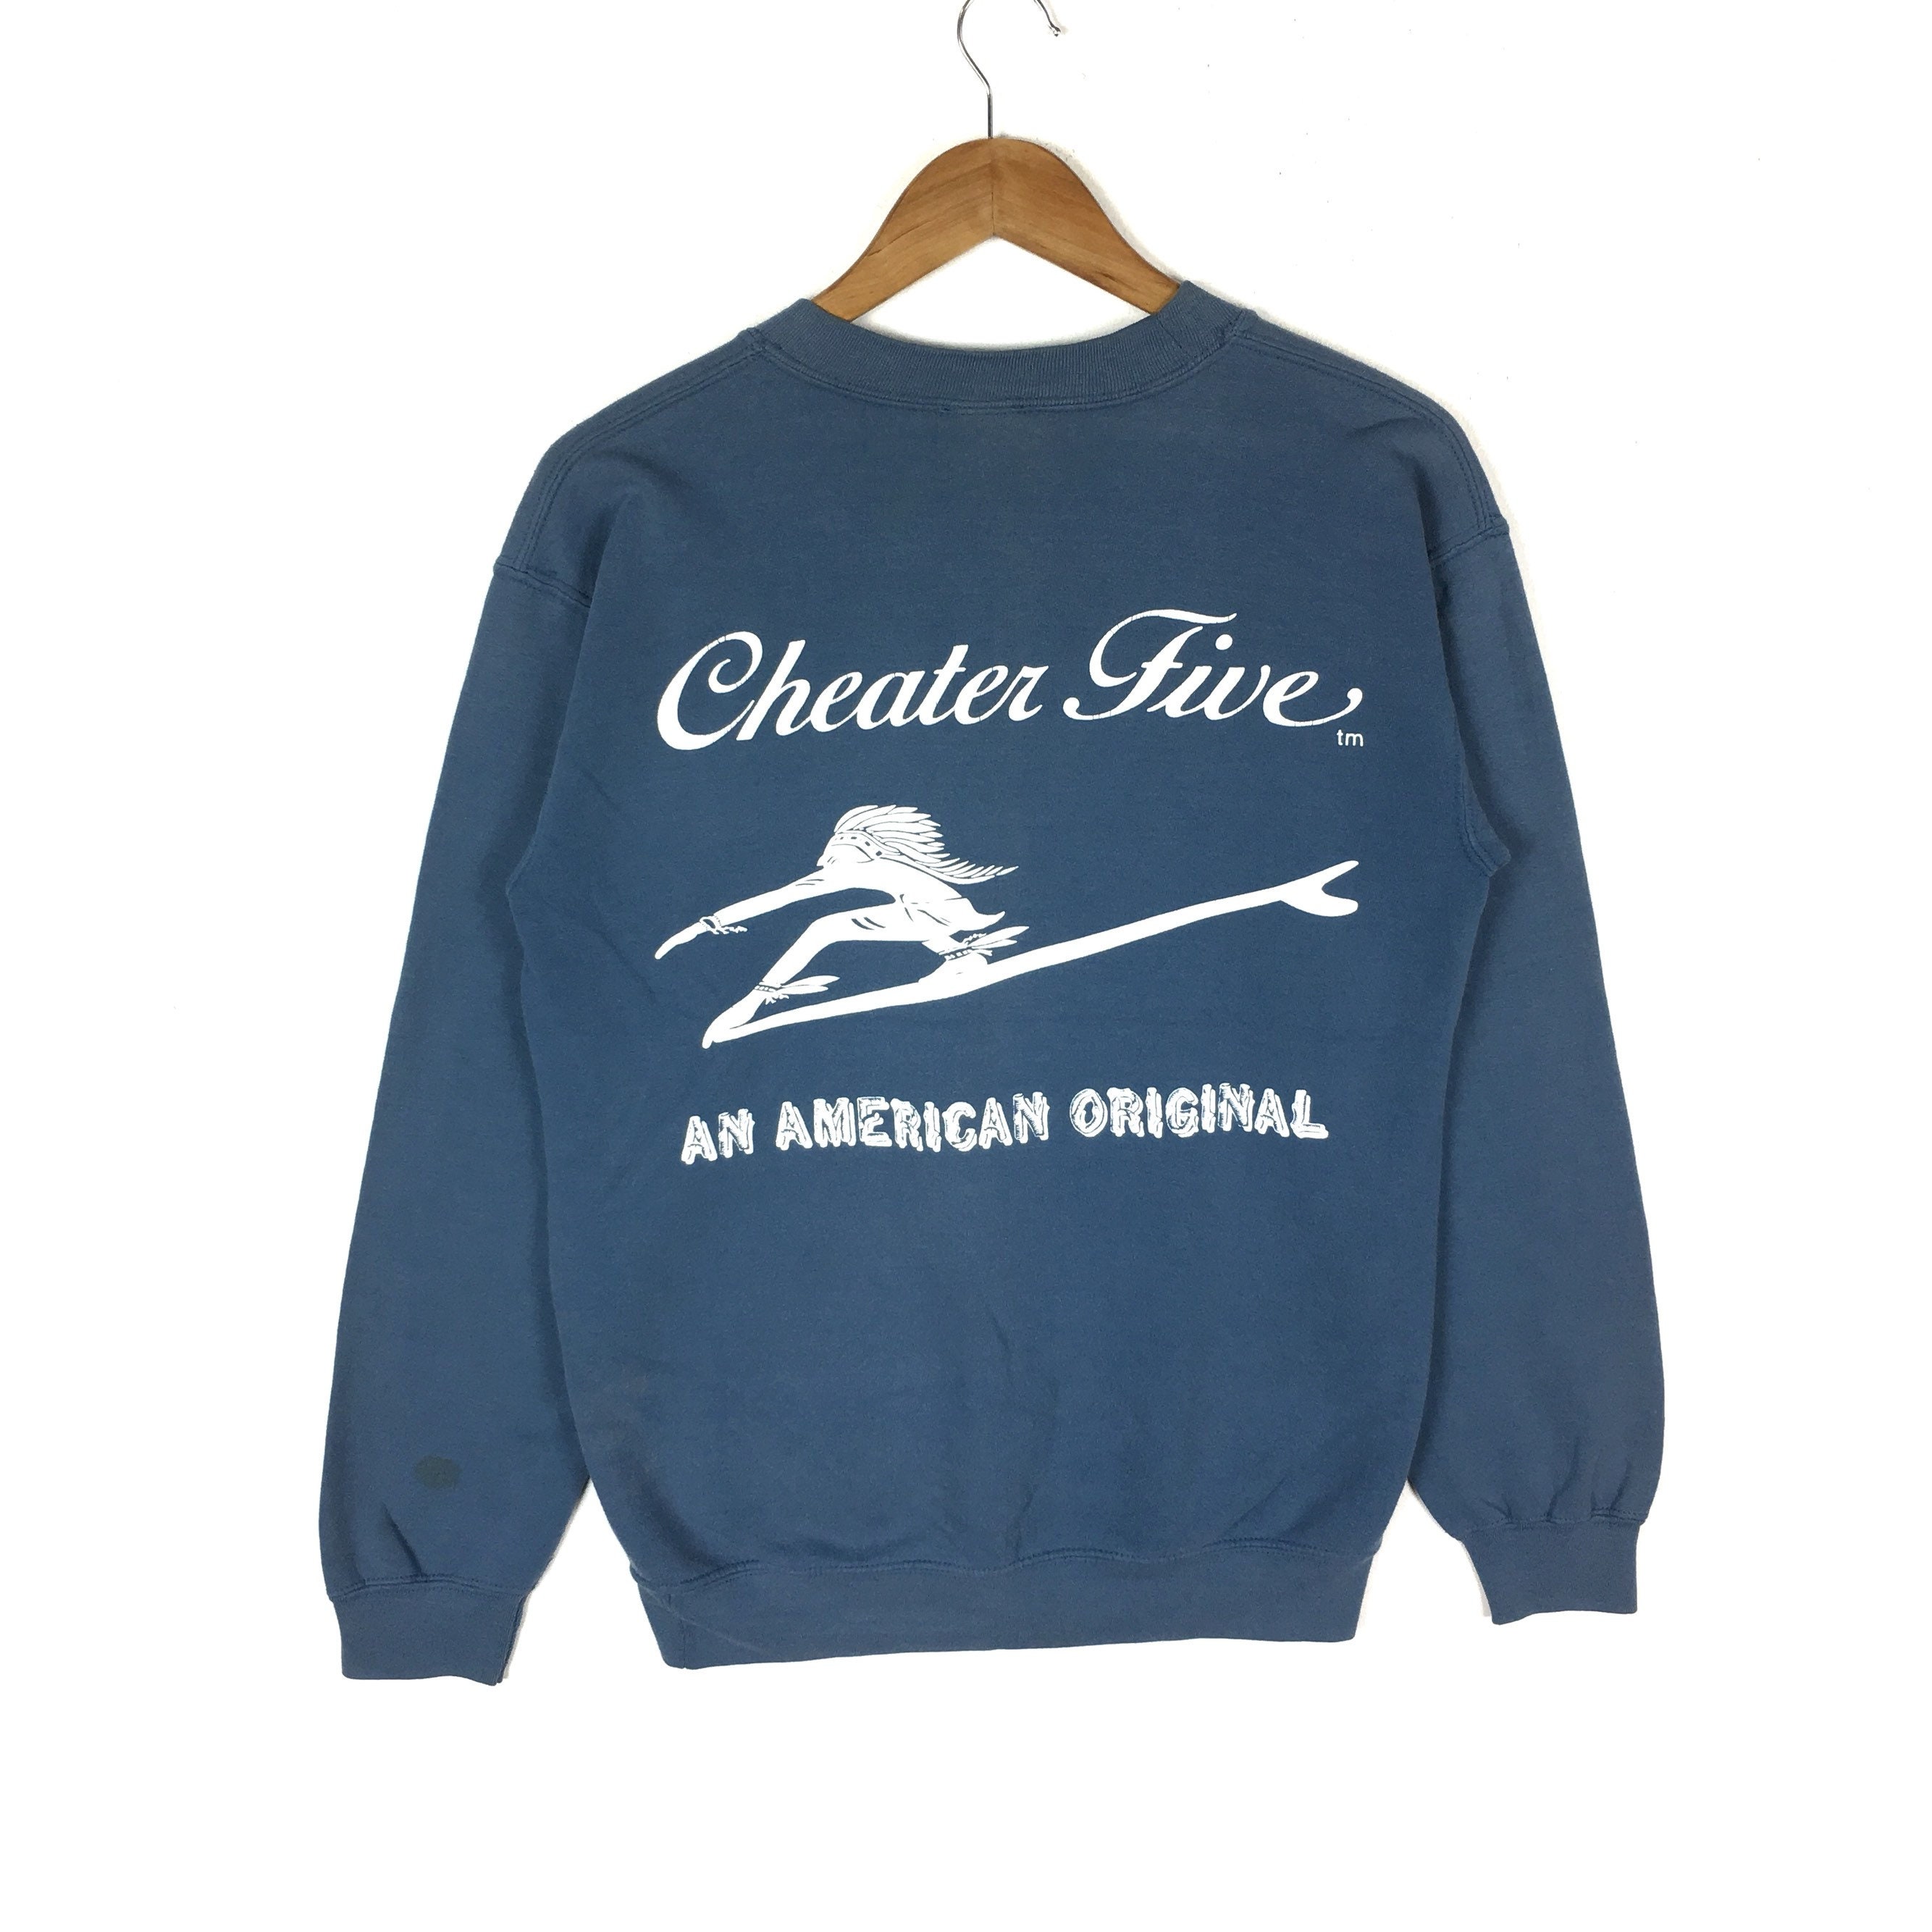 Cheater Five Surfing Sweatshirt Big Logo Printed Blue Colour Small Size ...